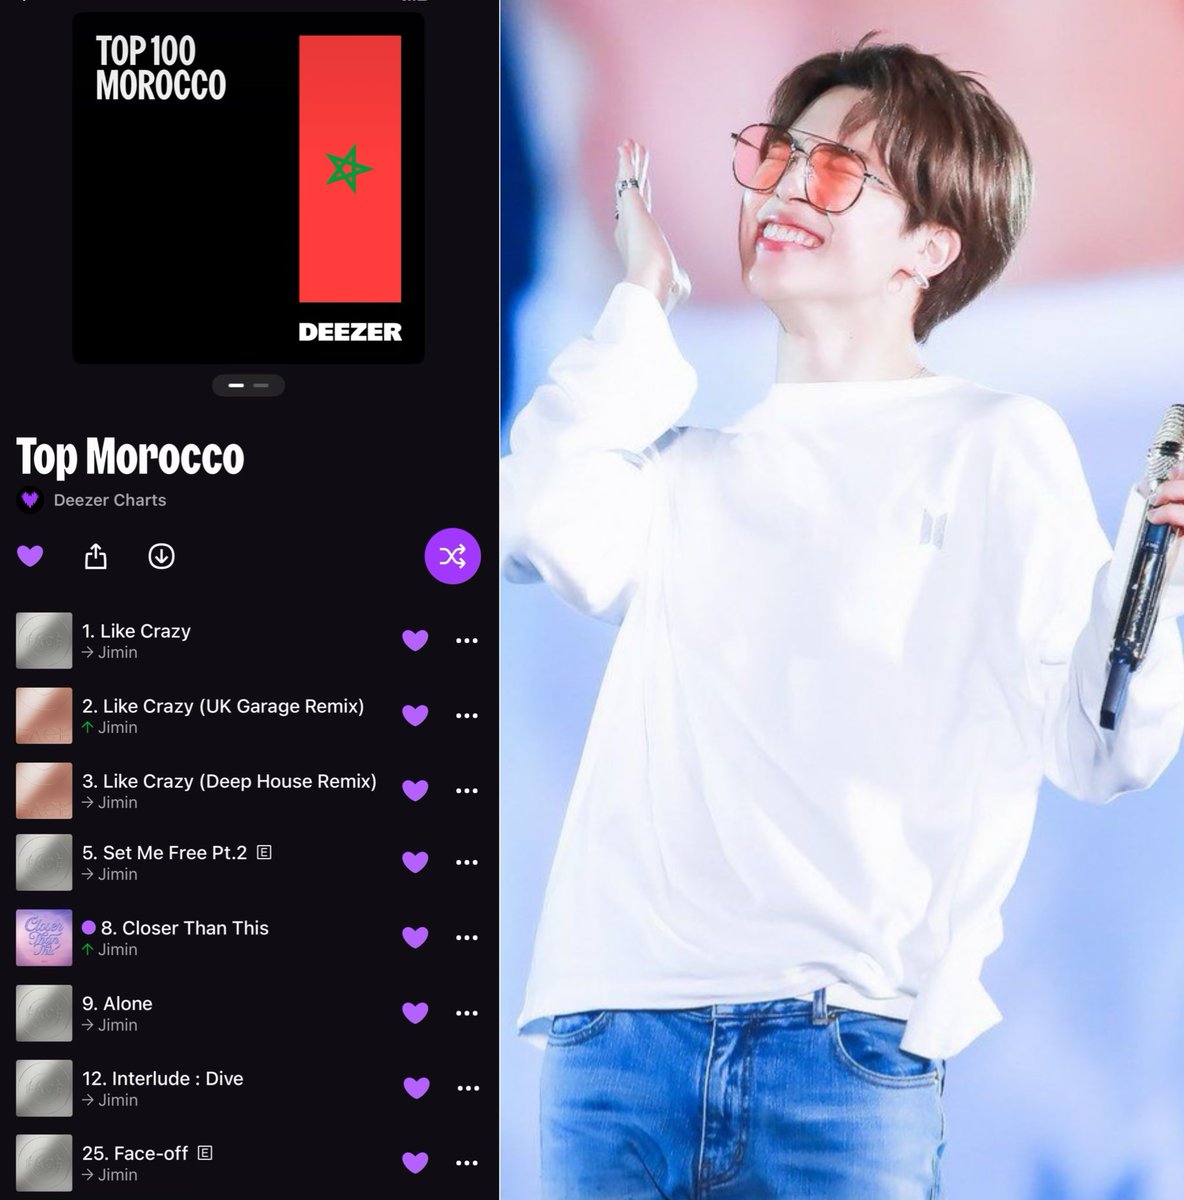 'Like Crazy' Remain at #1 on Deezer Top 100 Morocco 🇲🇦.

8 of Jimin’s songs occupy the Top 25 😱🔥🥳

GOOD JOB TEAM MOROCCO ON FIRE 🤩🔥🫰